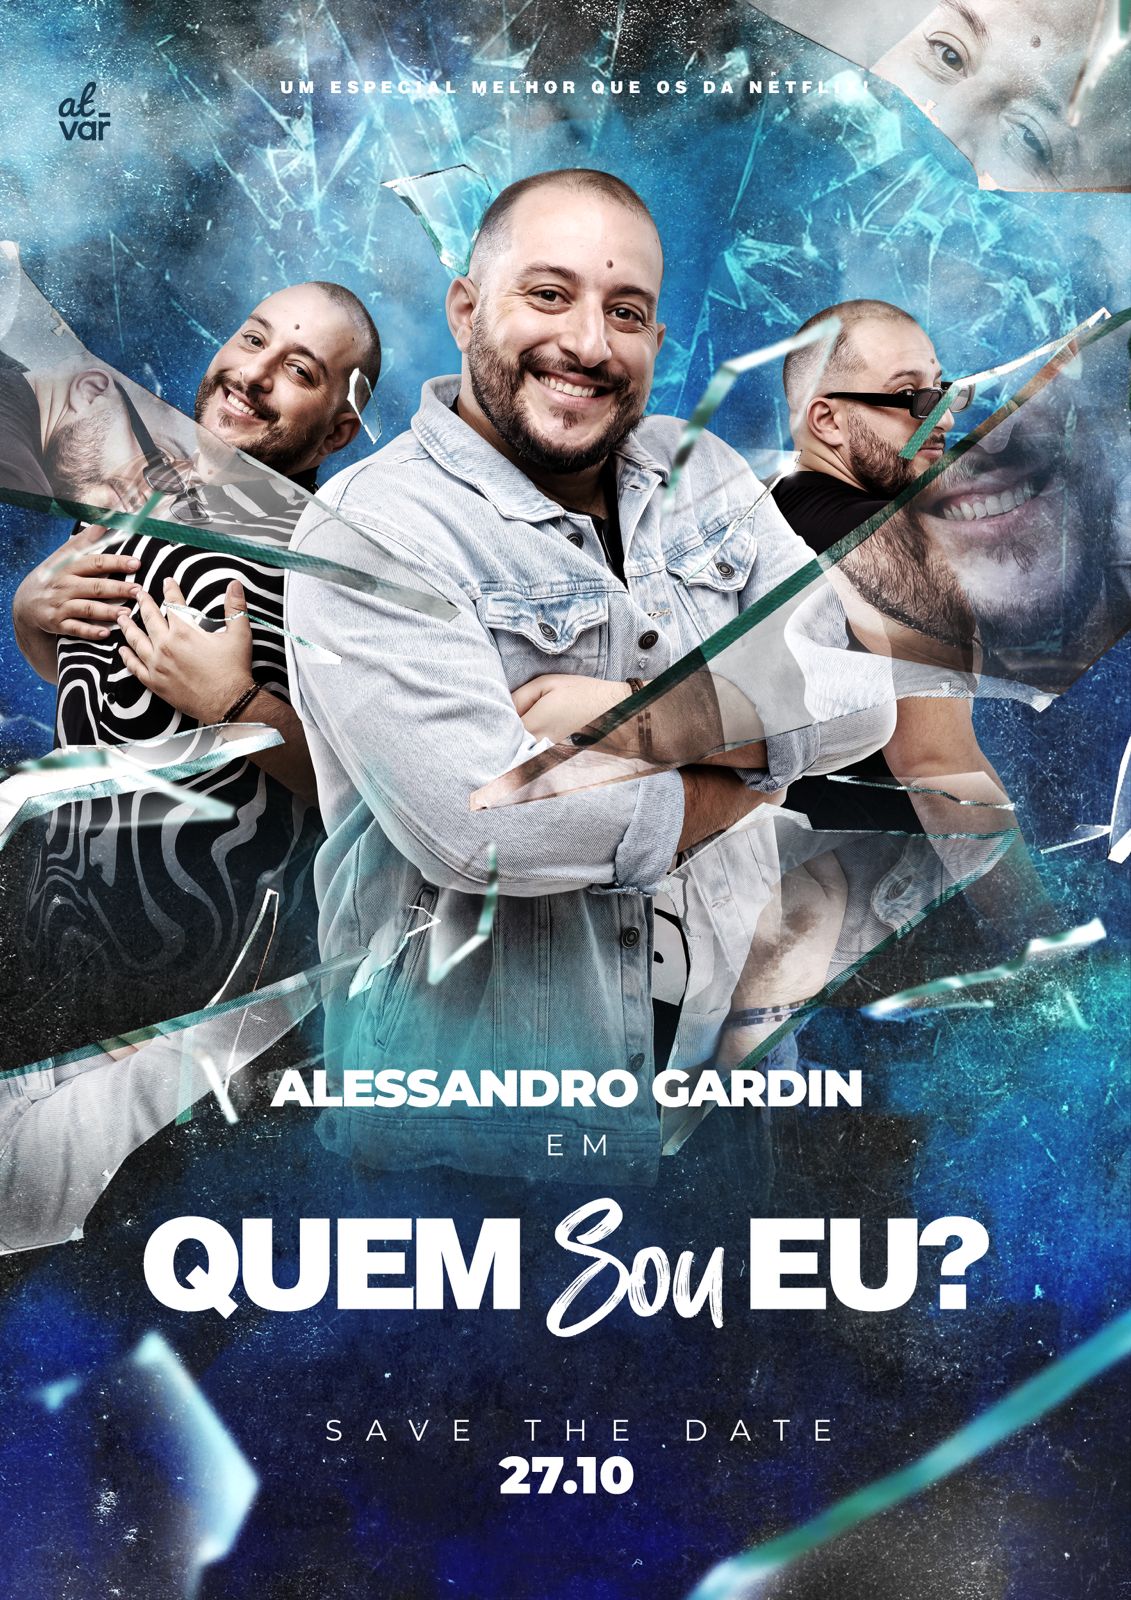 Stand Up Comedy Show - Alessandro Gardin